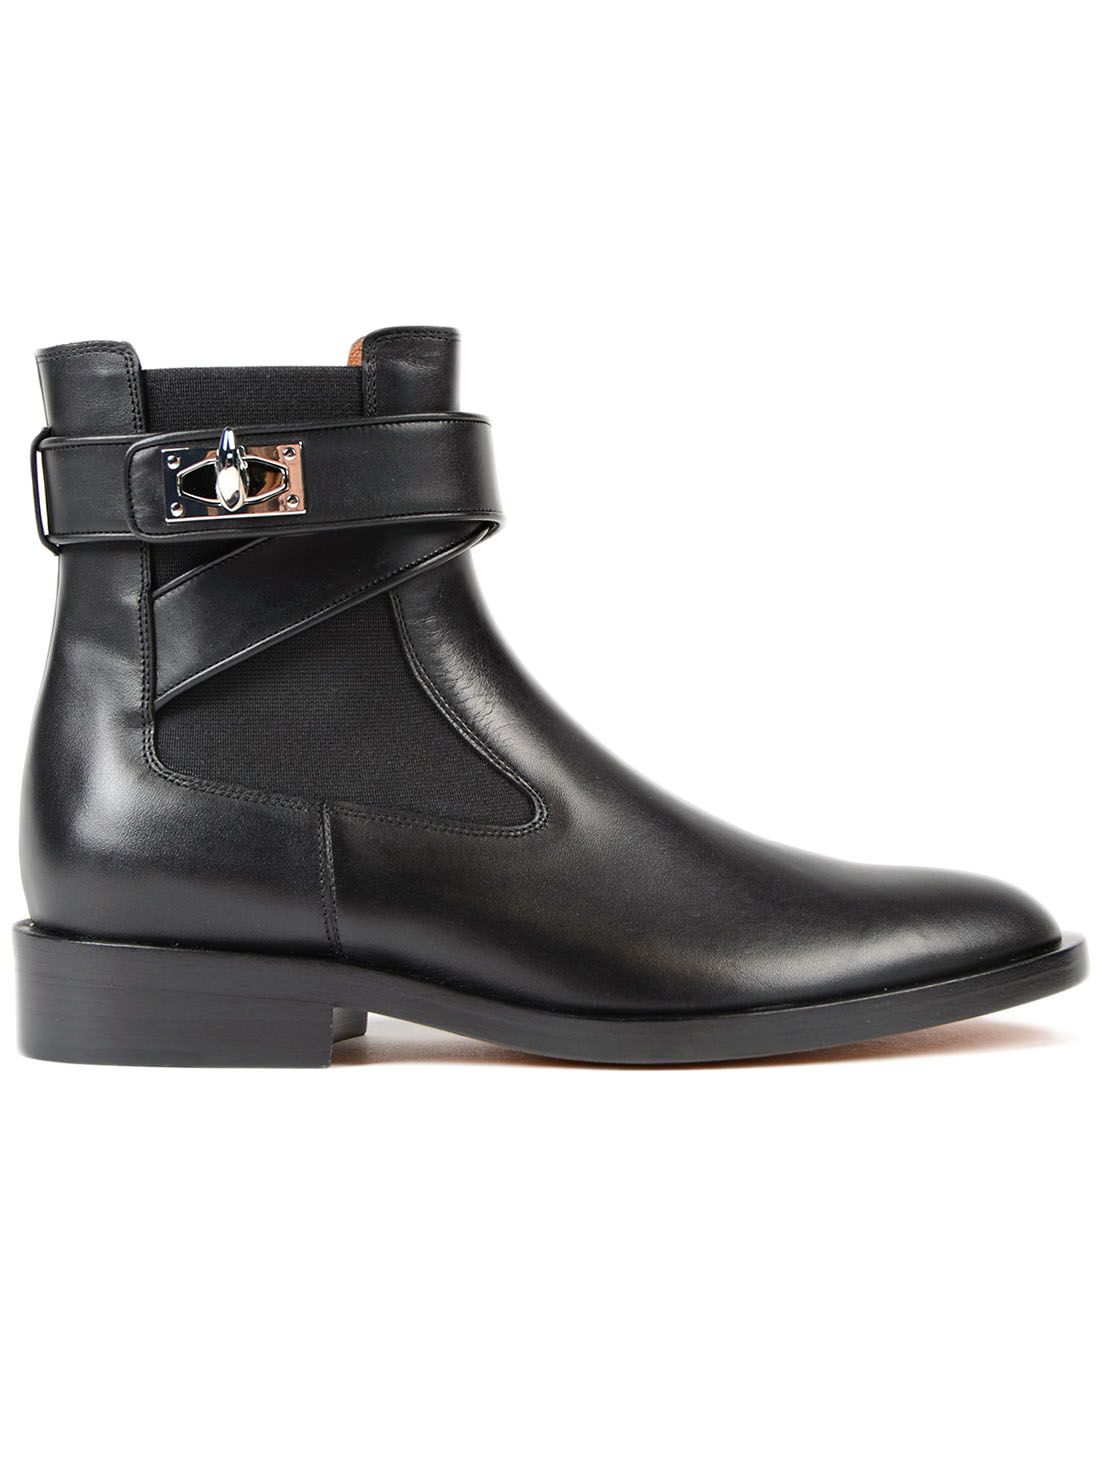 Givenchy - Givenchy Shark Flat Ankle Boots - Black, Women's Boots | Italist